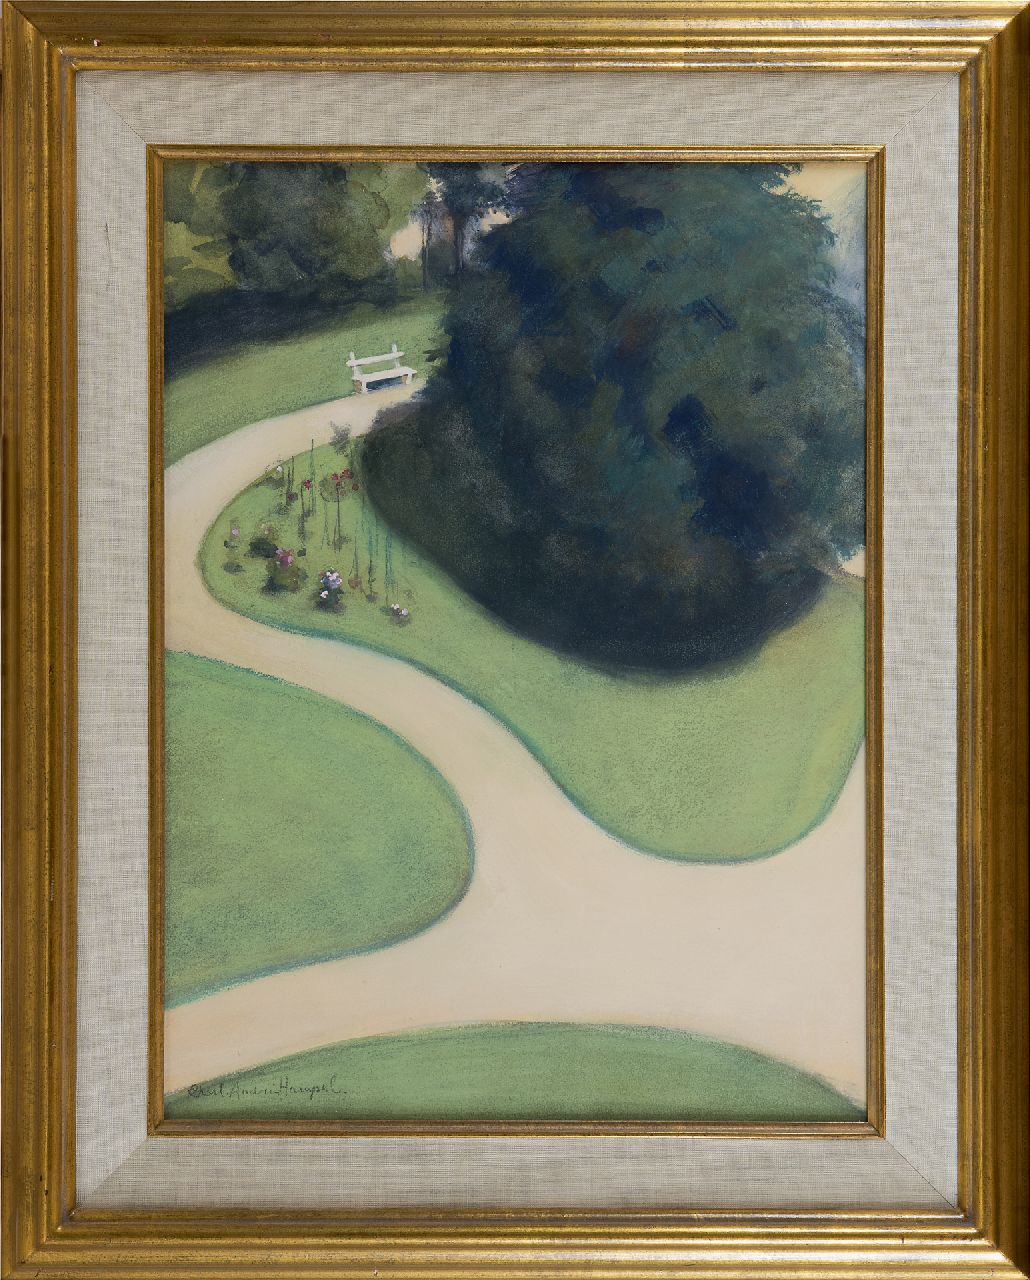 Hampel C.  | Charlotte Hampel, The white bench, chalk and gouache on paper 44.3 x 32.7 cm, signed l.l. and executed after 1897